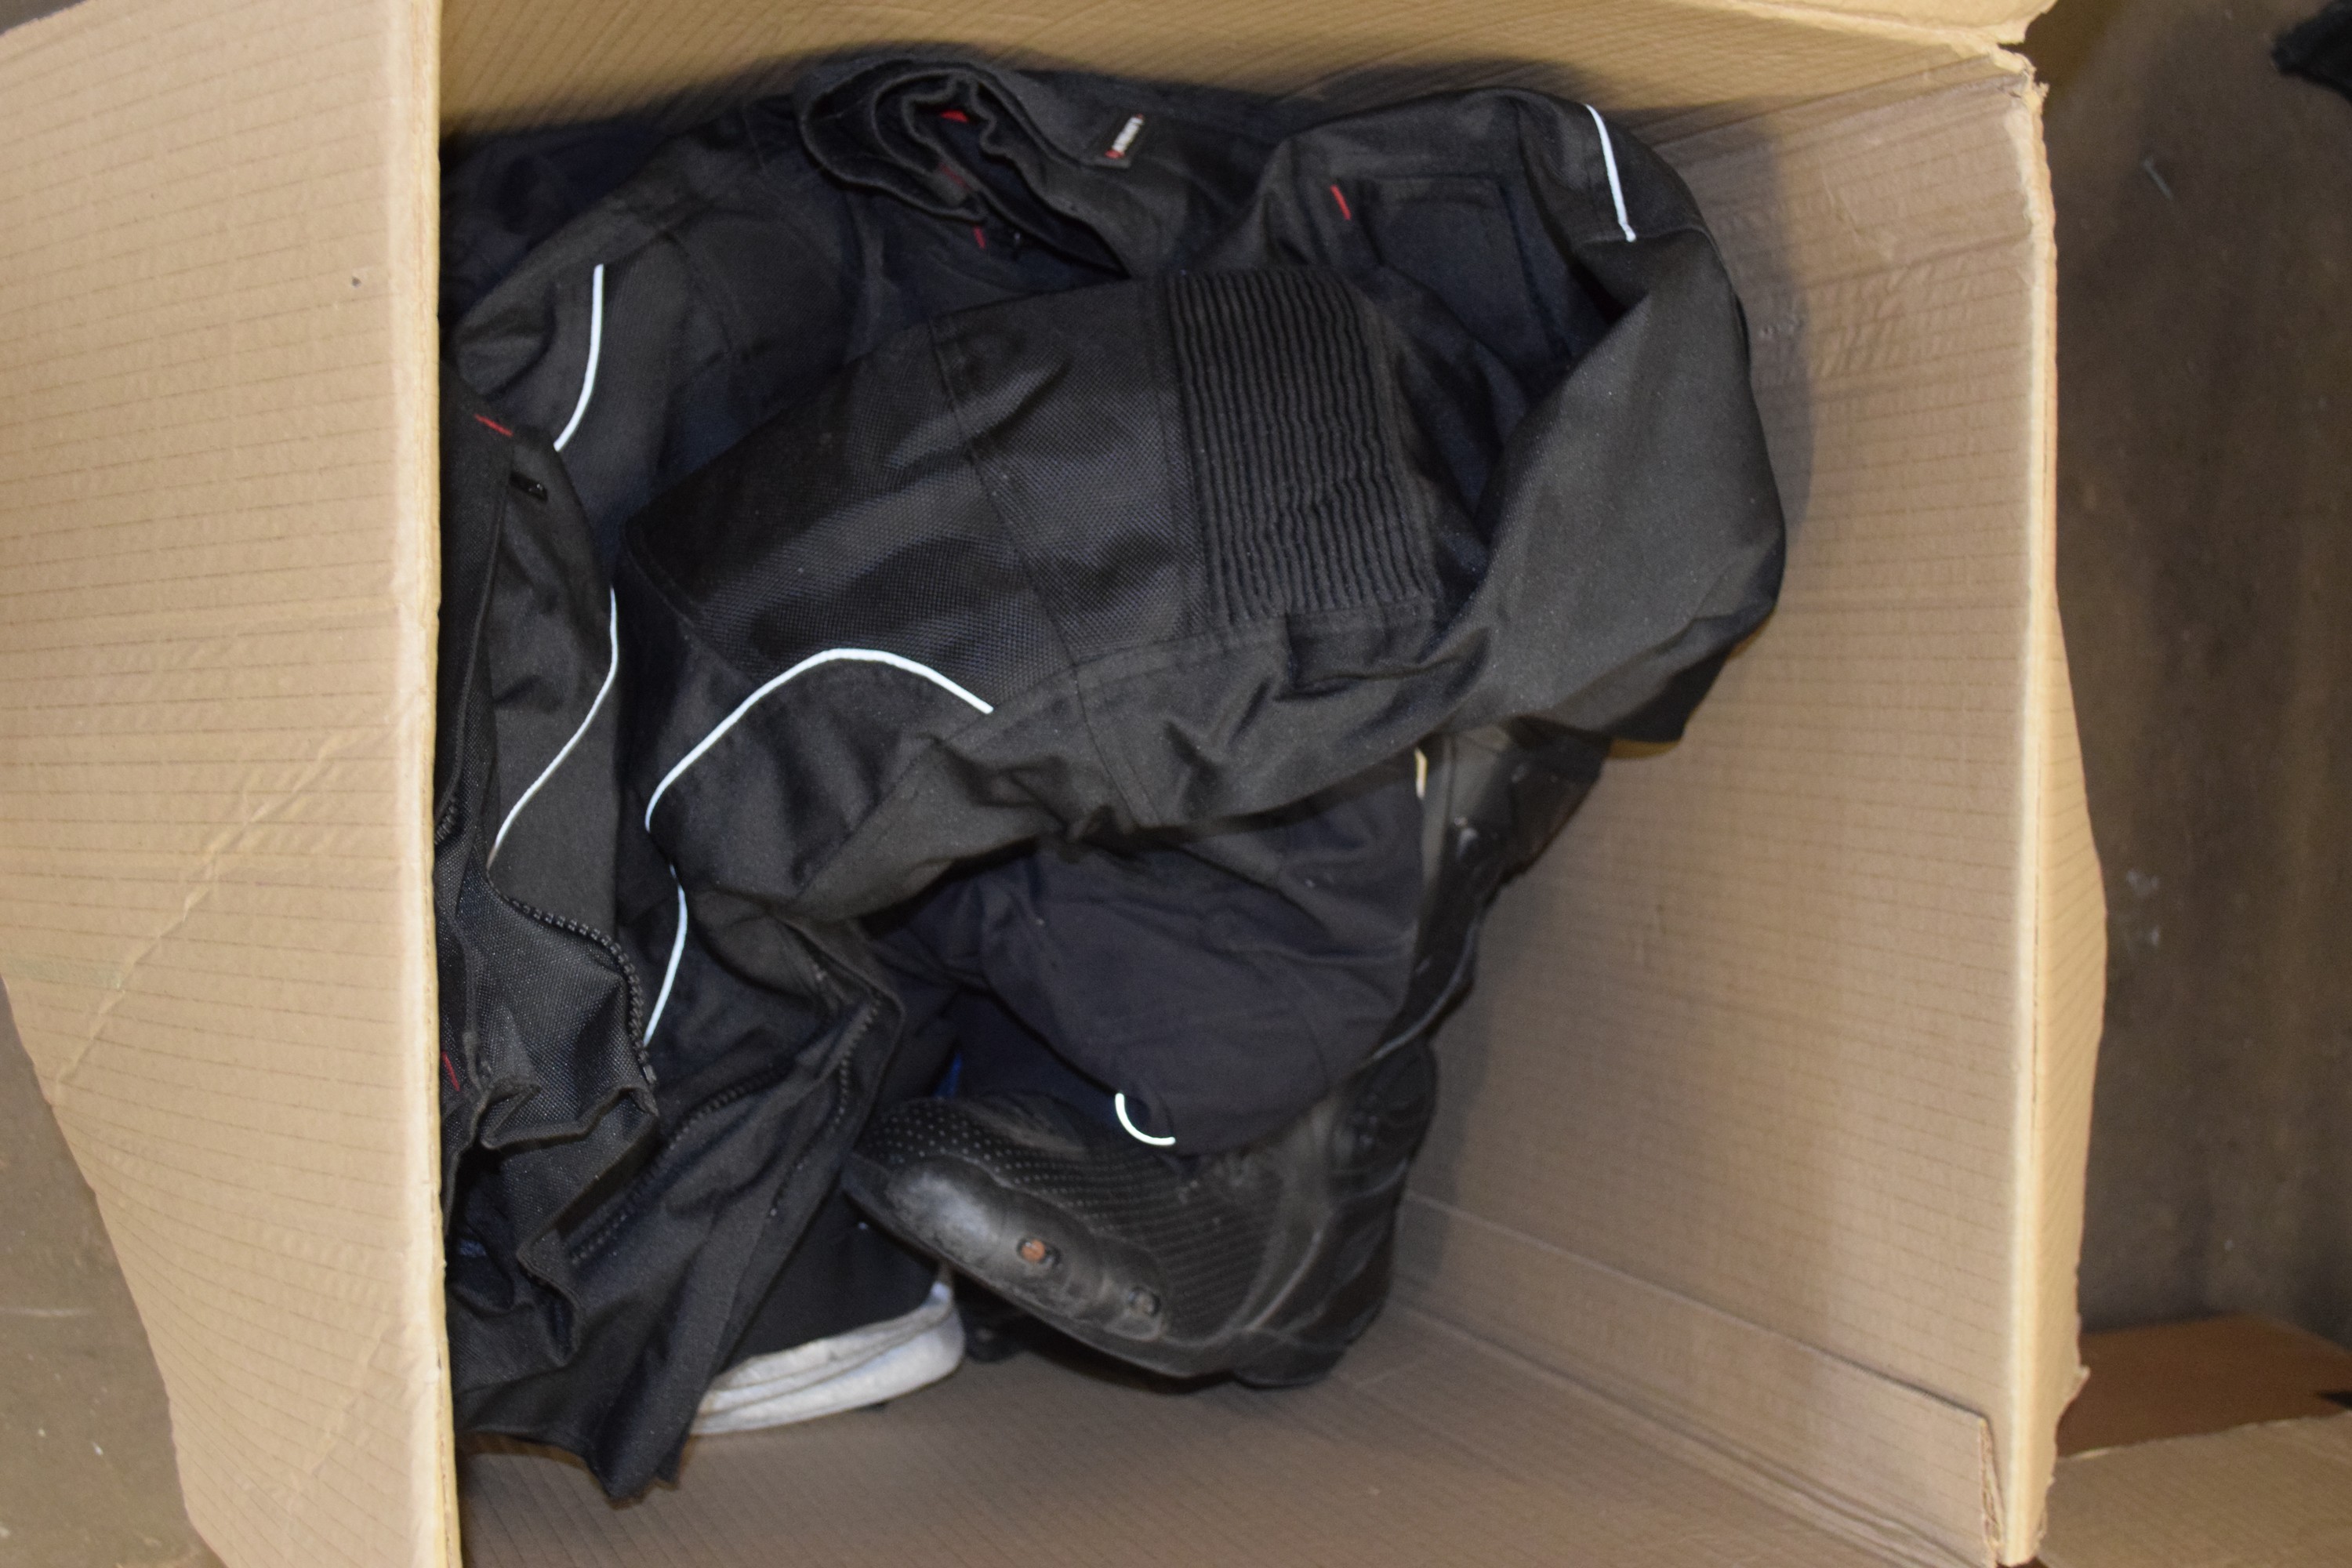 BOX CONTAINING MOTORCYCLE TROUSERS AND SHOES, TWO BICYCLE HELMETS